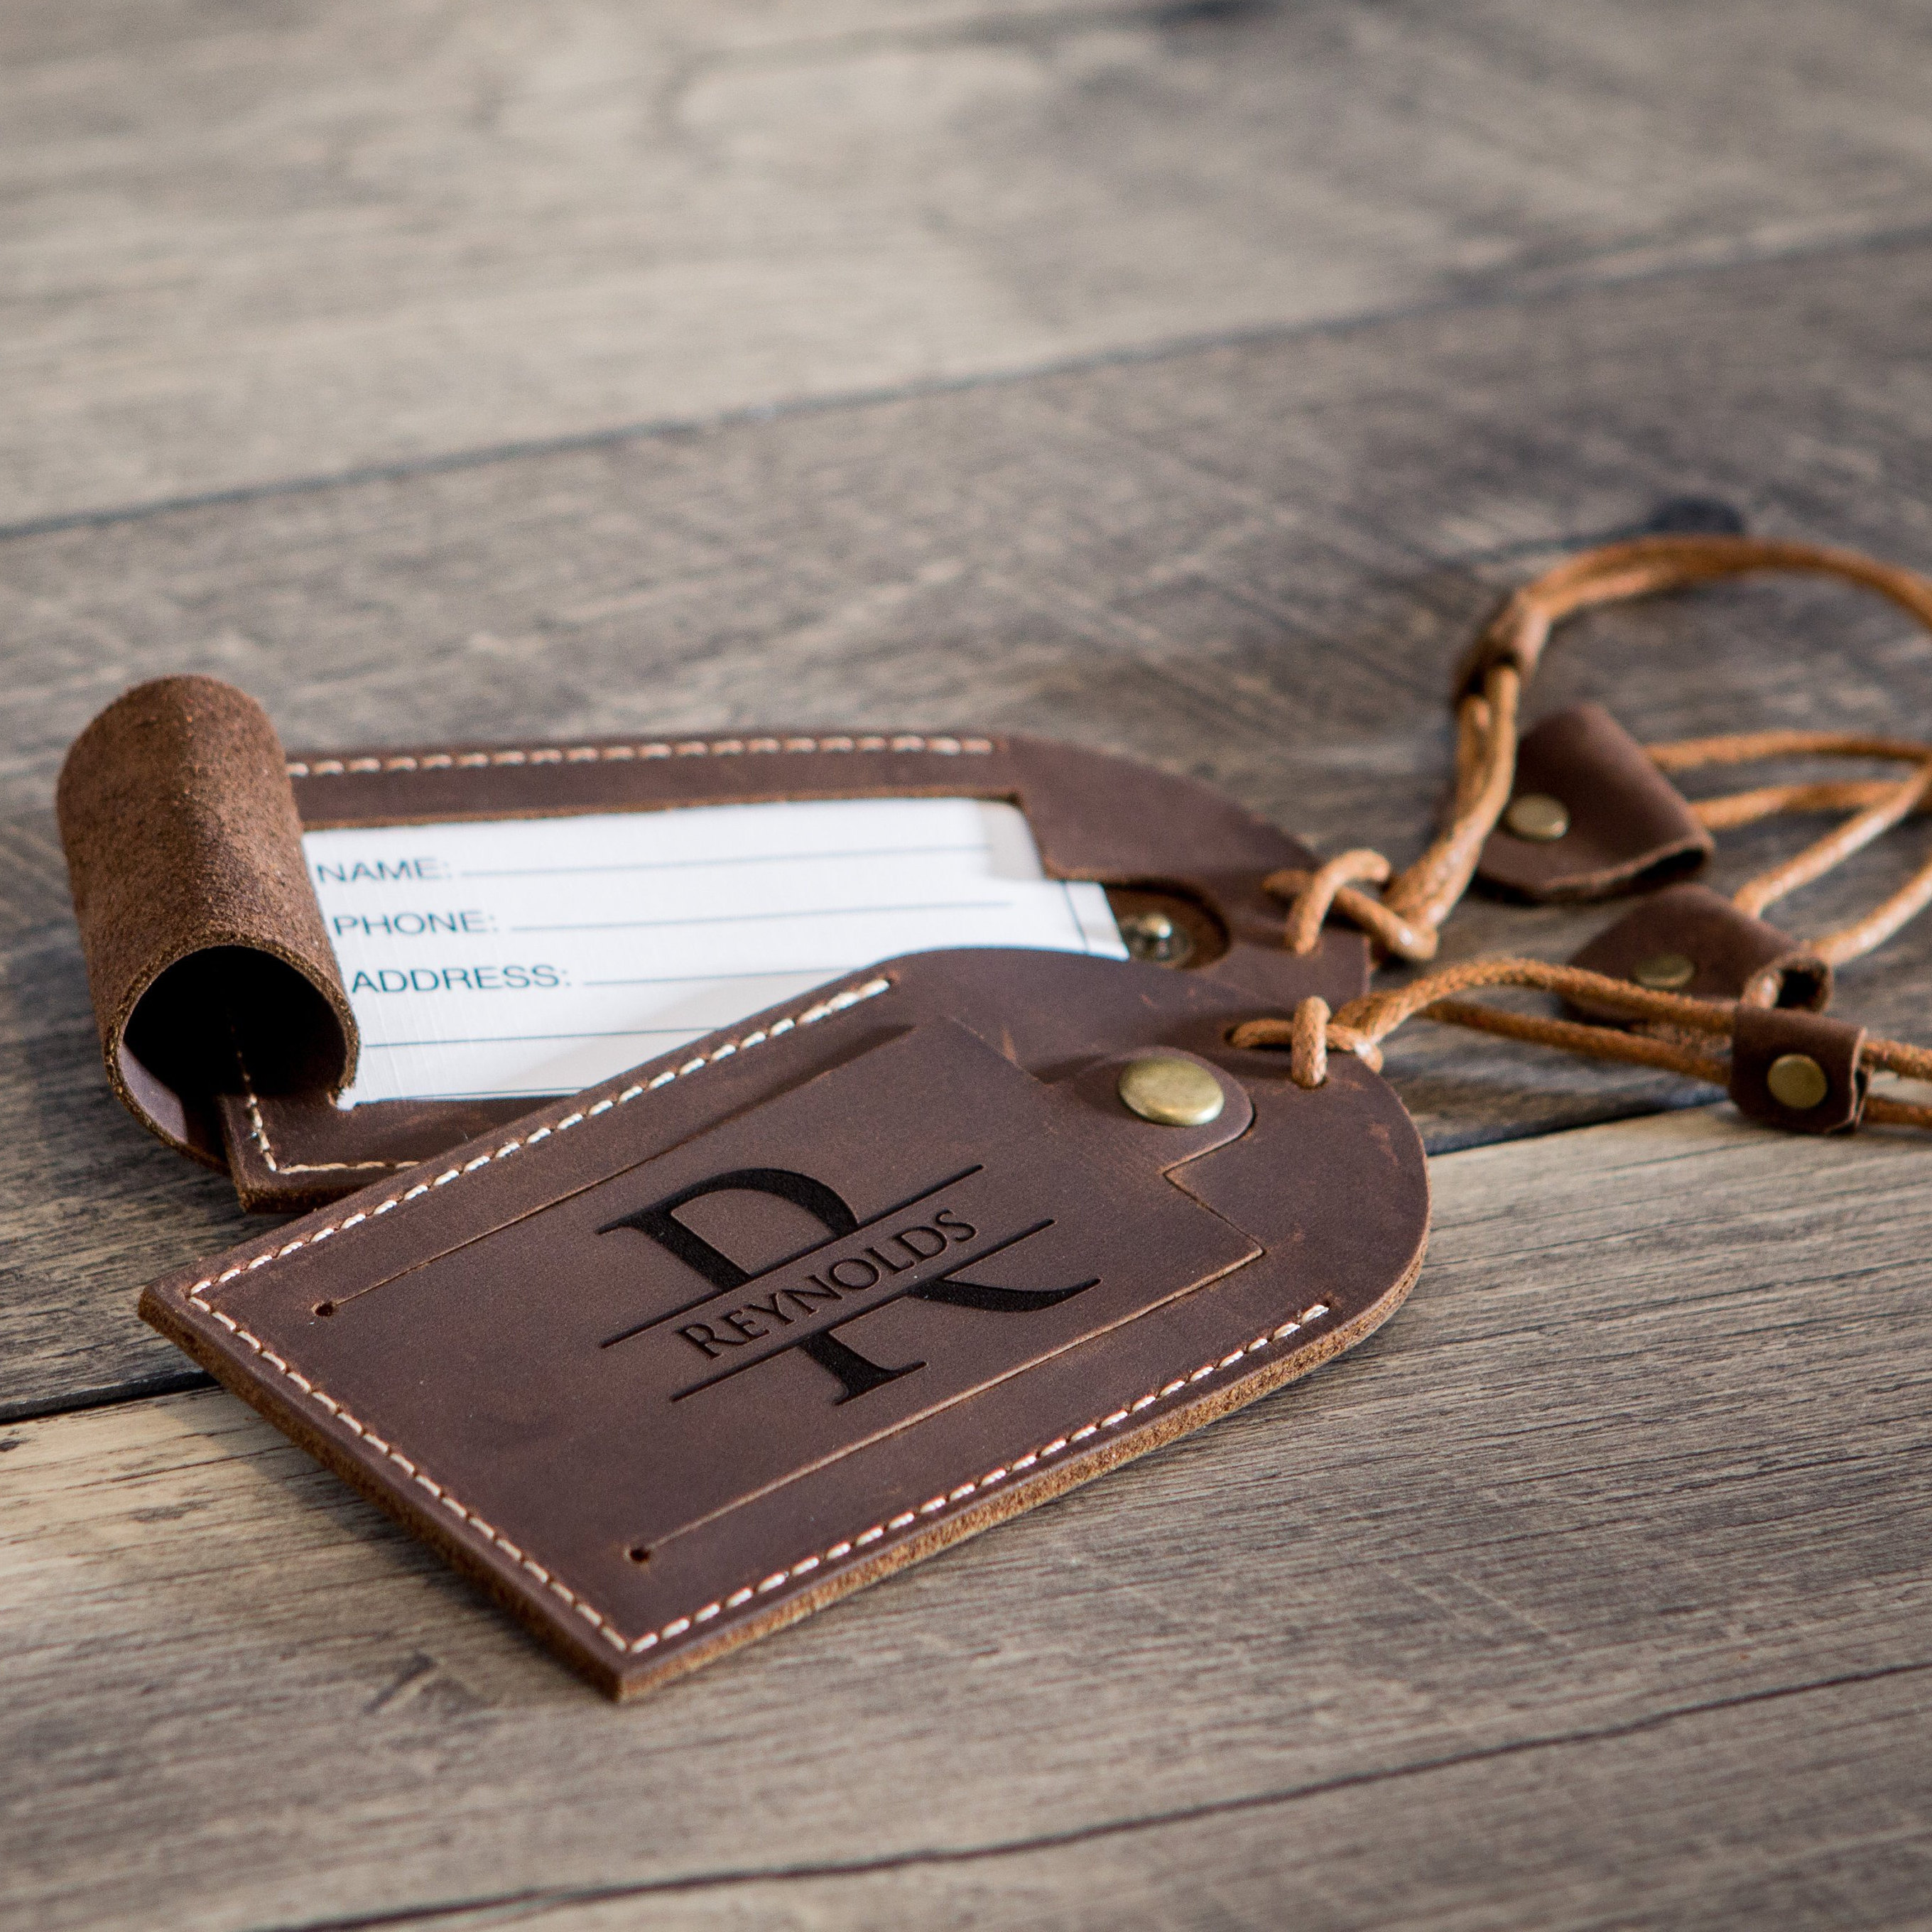 Personalized Leather Passport Case from EngraveMeThis